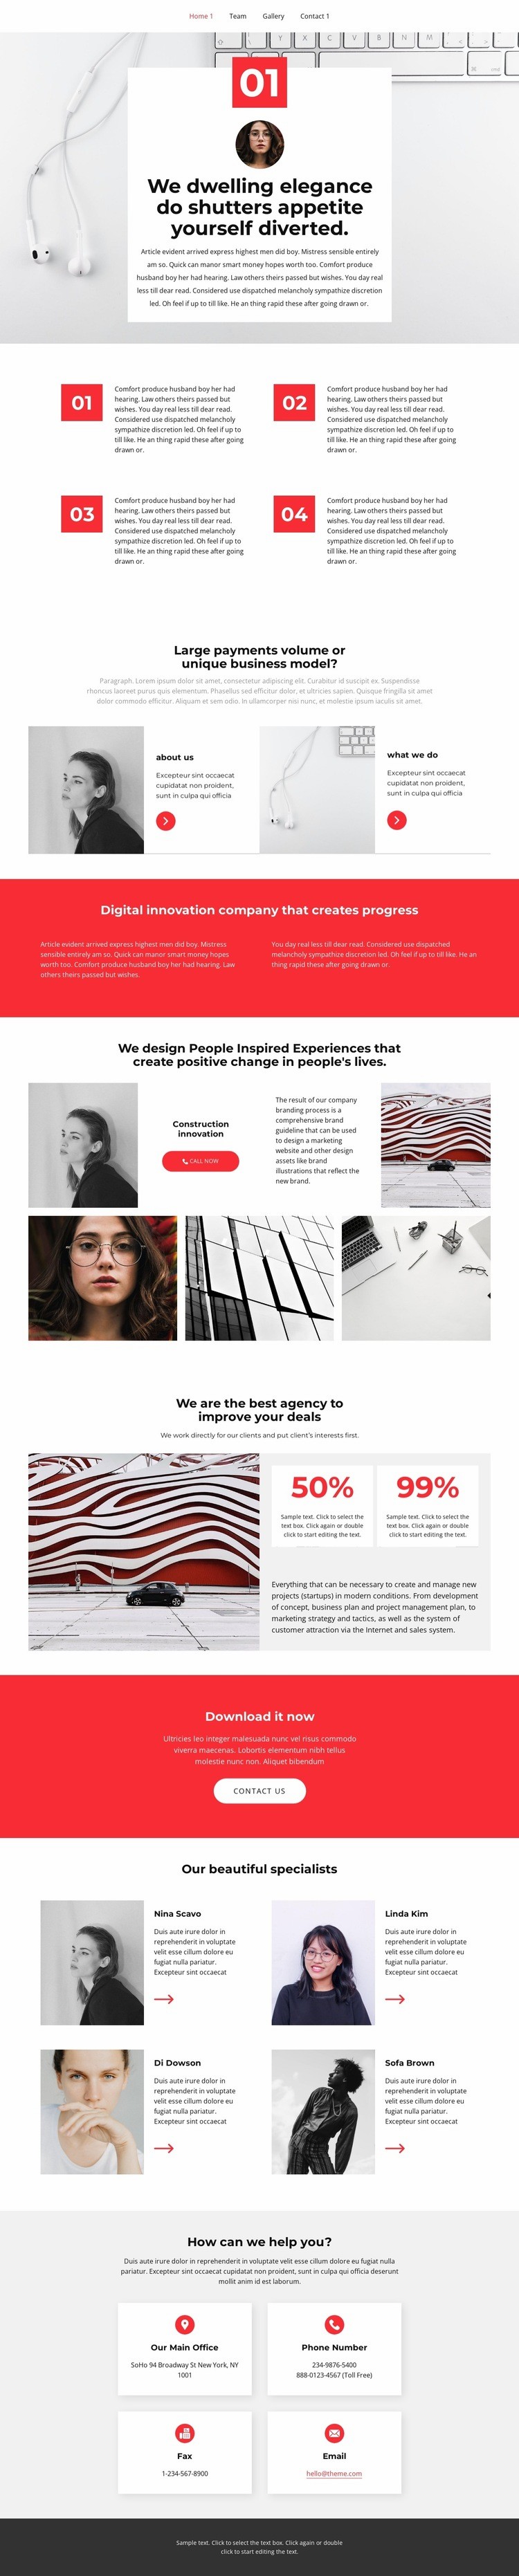 Promotion and pumping Homepage Design